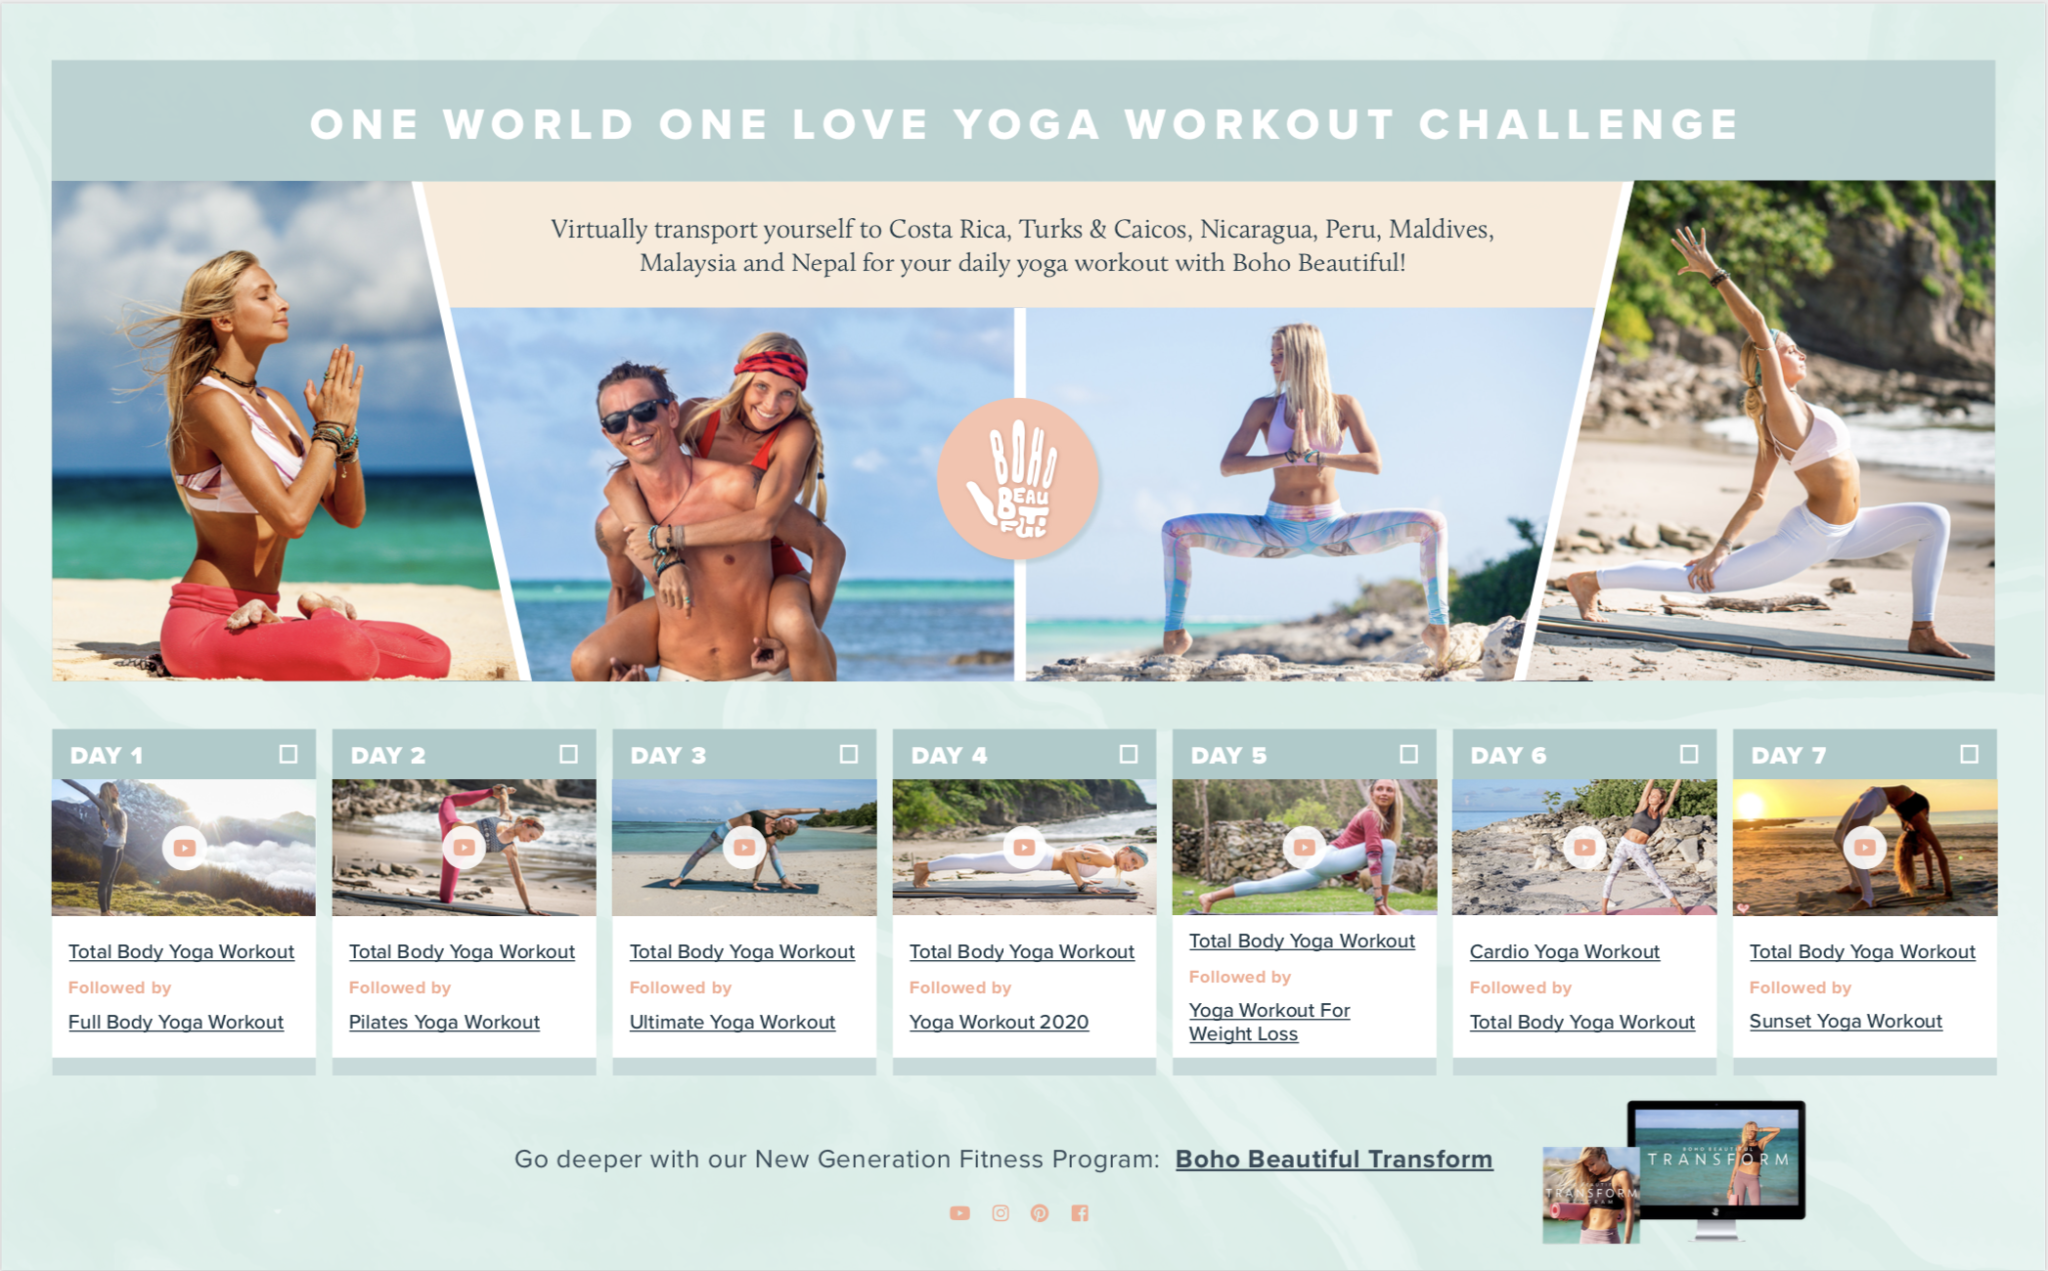 One World One Love Yoga Workout Challenge